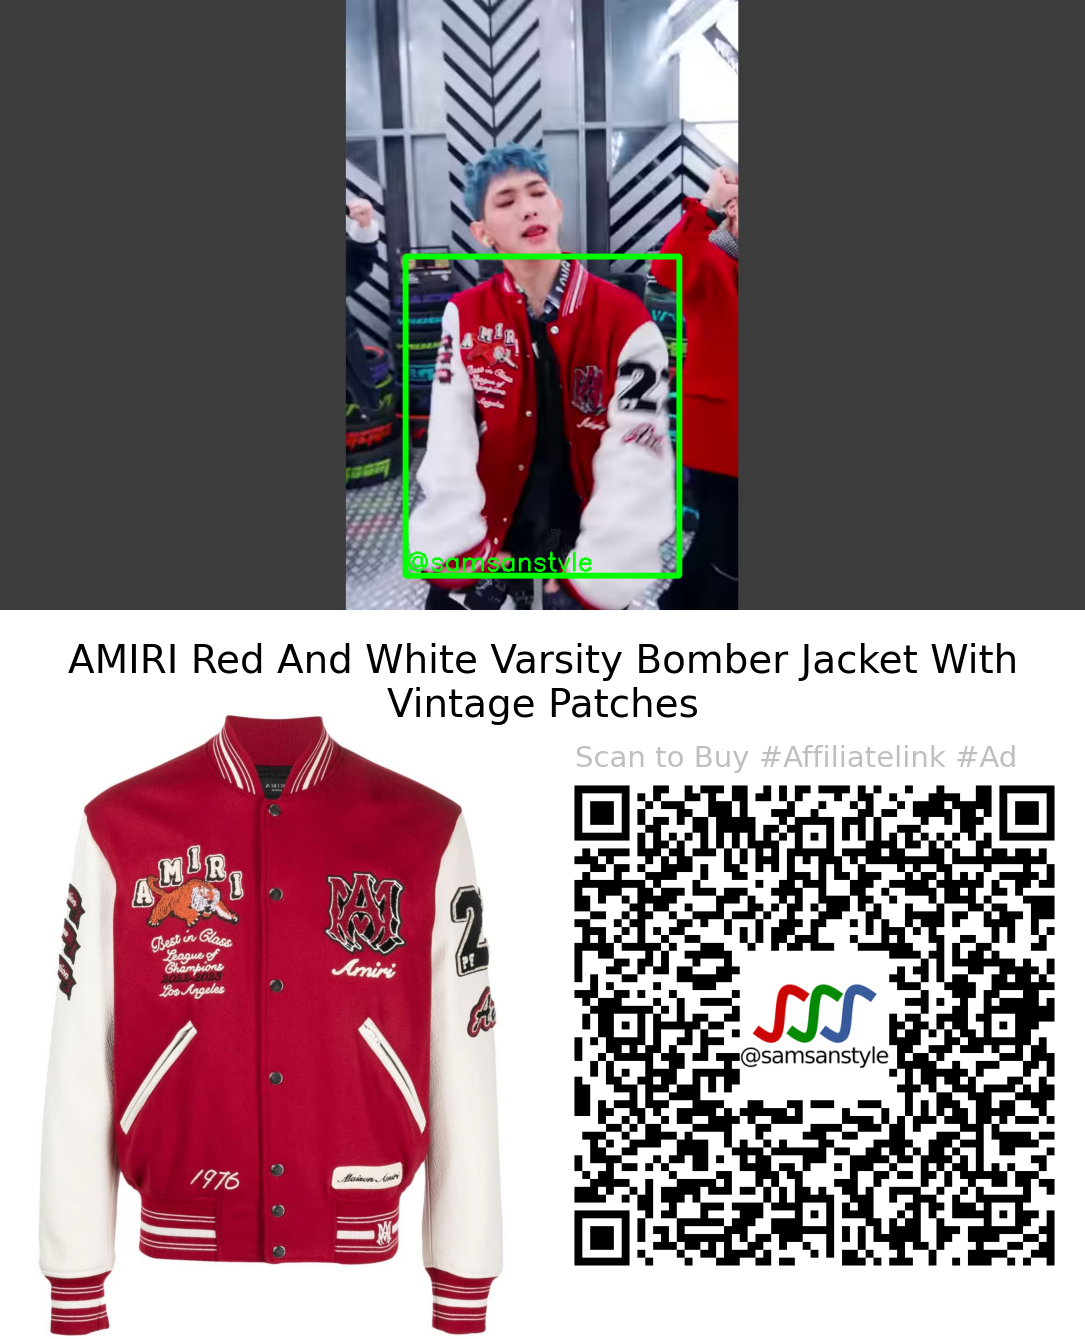 TEMPEST LEW | Vroom Vroom MV | AMIRI Red And White Varsity Bomber Jacket With Vintage Patches